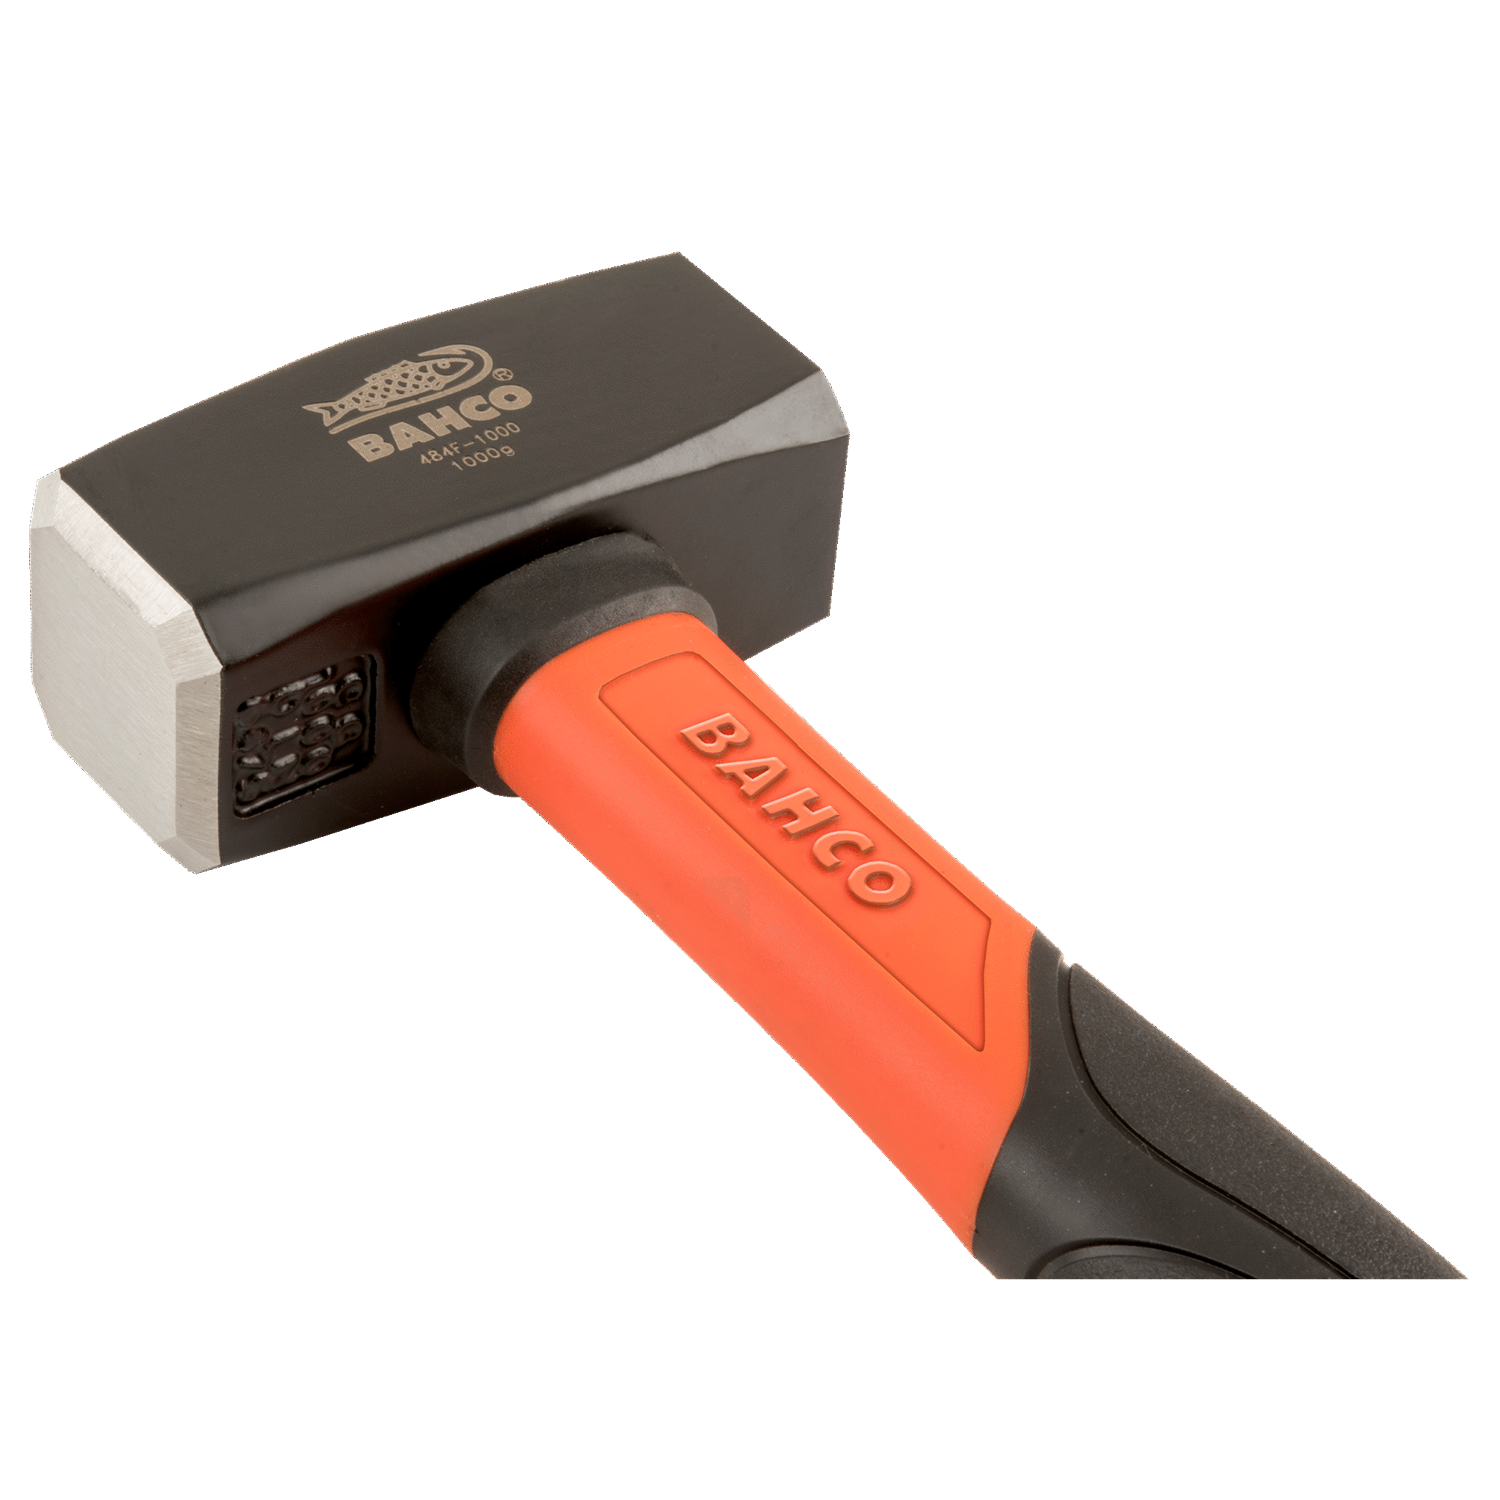 BAHCO 484F Club Hammer Fiberglass Handle (BAHCO Tools) - Premium Club Hammer from BAHCO - Shop now at Yew Aik.